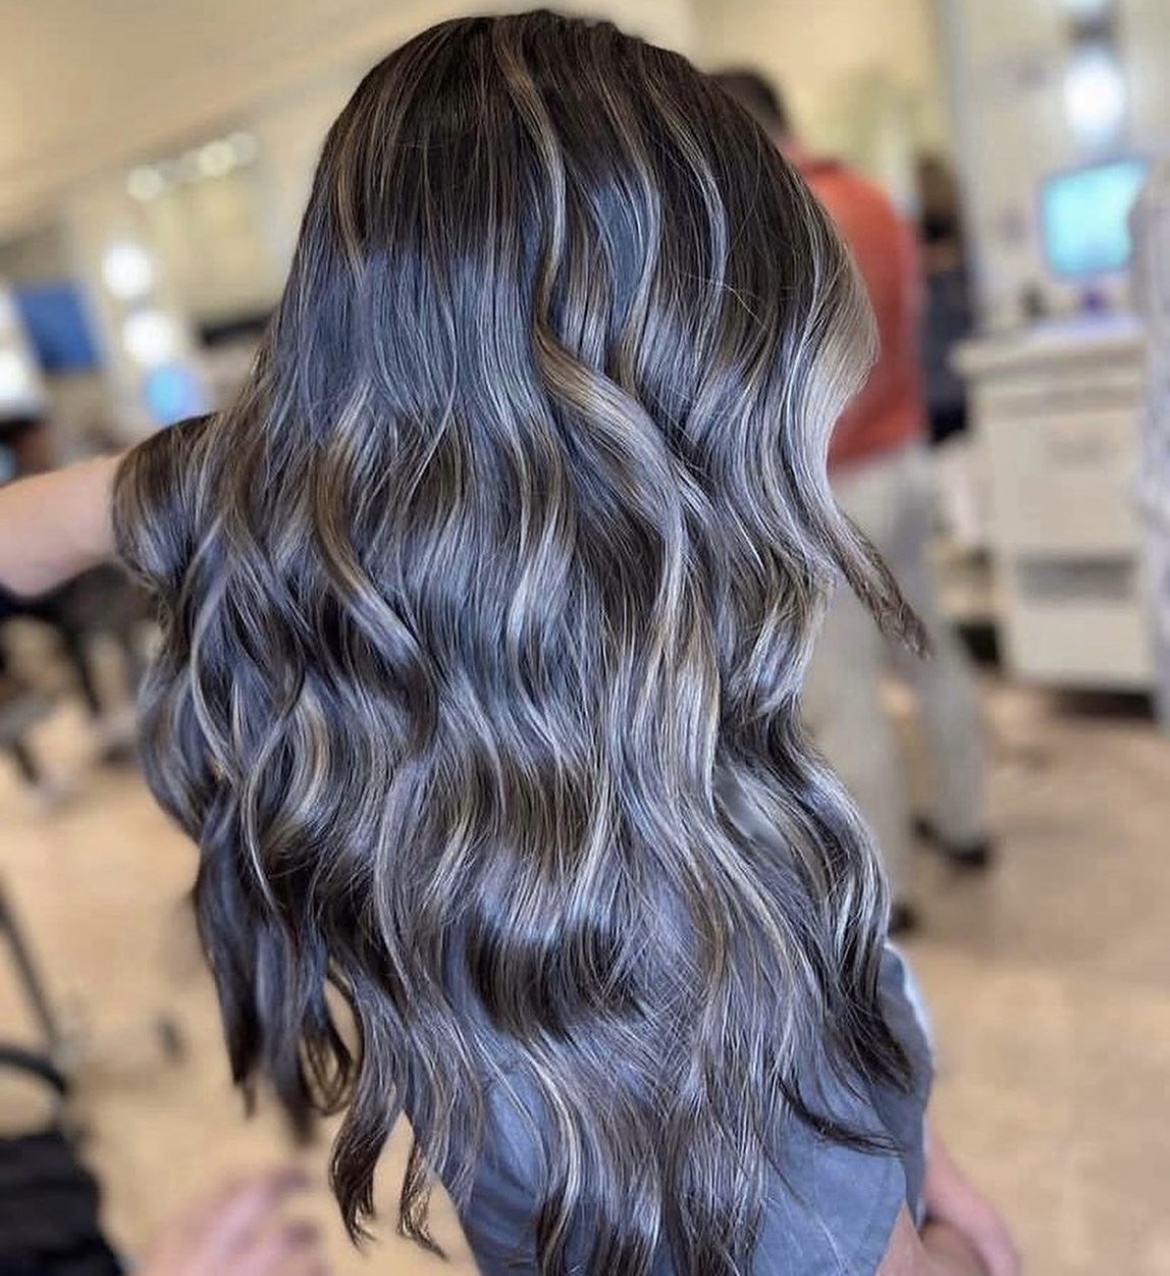 5 Recommendations from a Hair salon in Winter Park